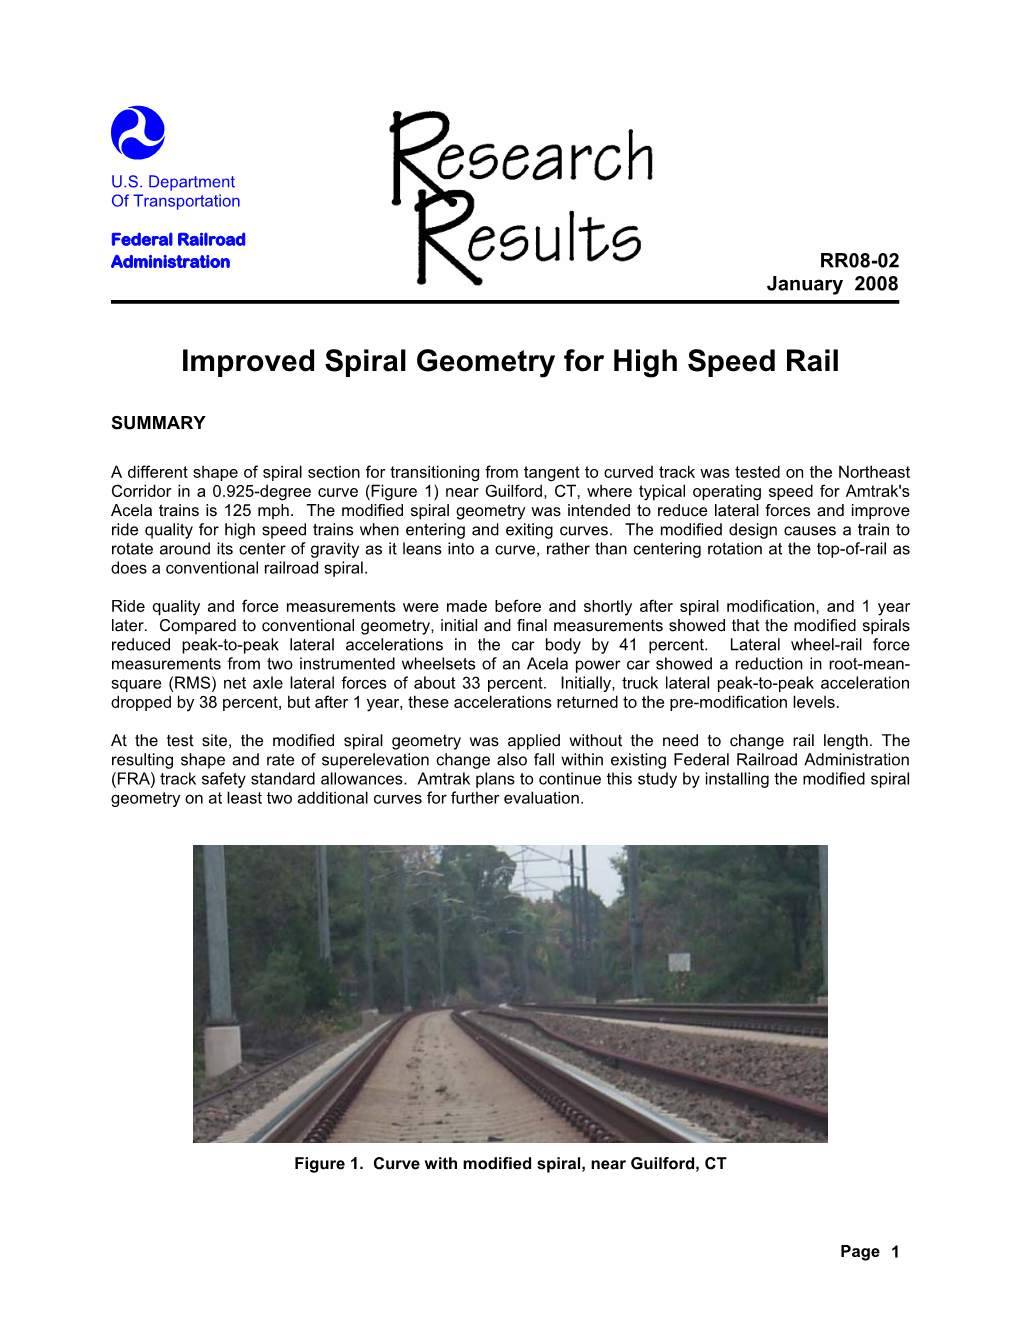 Improved Spiral Geometry for High Speed Rail